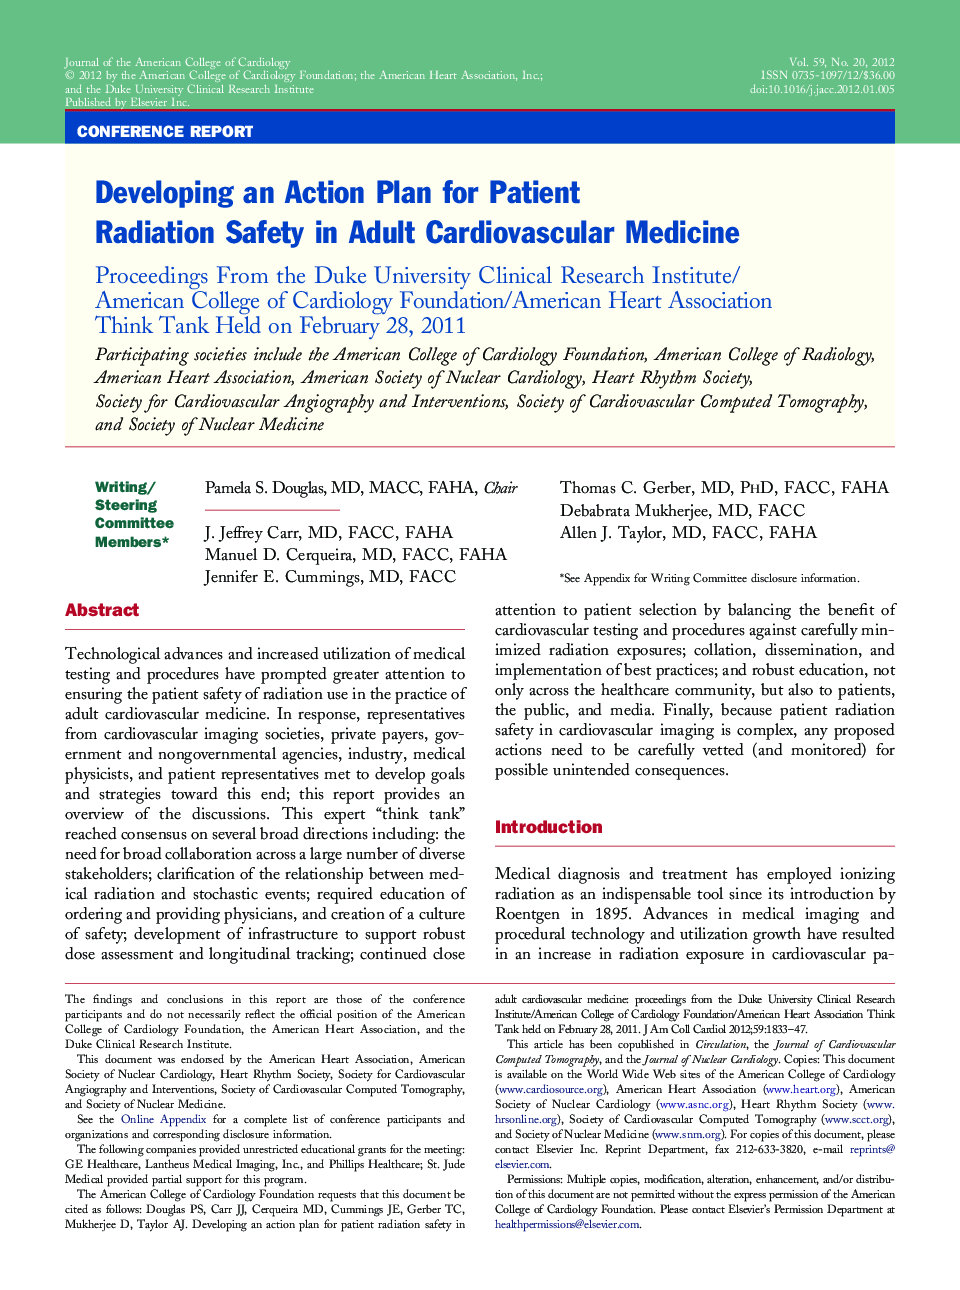 Developing an Action Plan for Patient Radiation Safety in Adult Cardiovascular Medicine